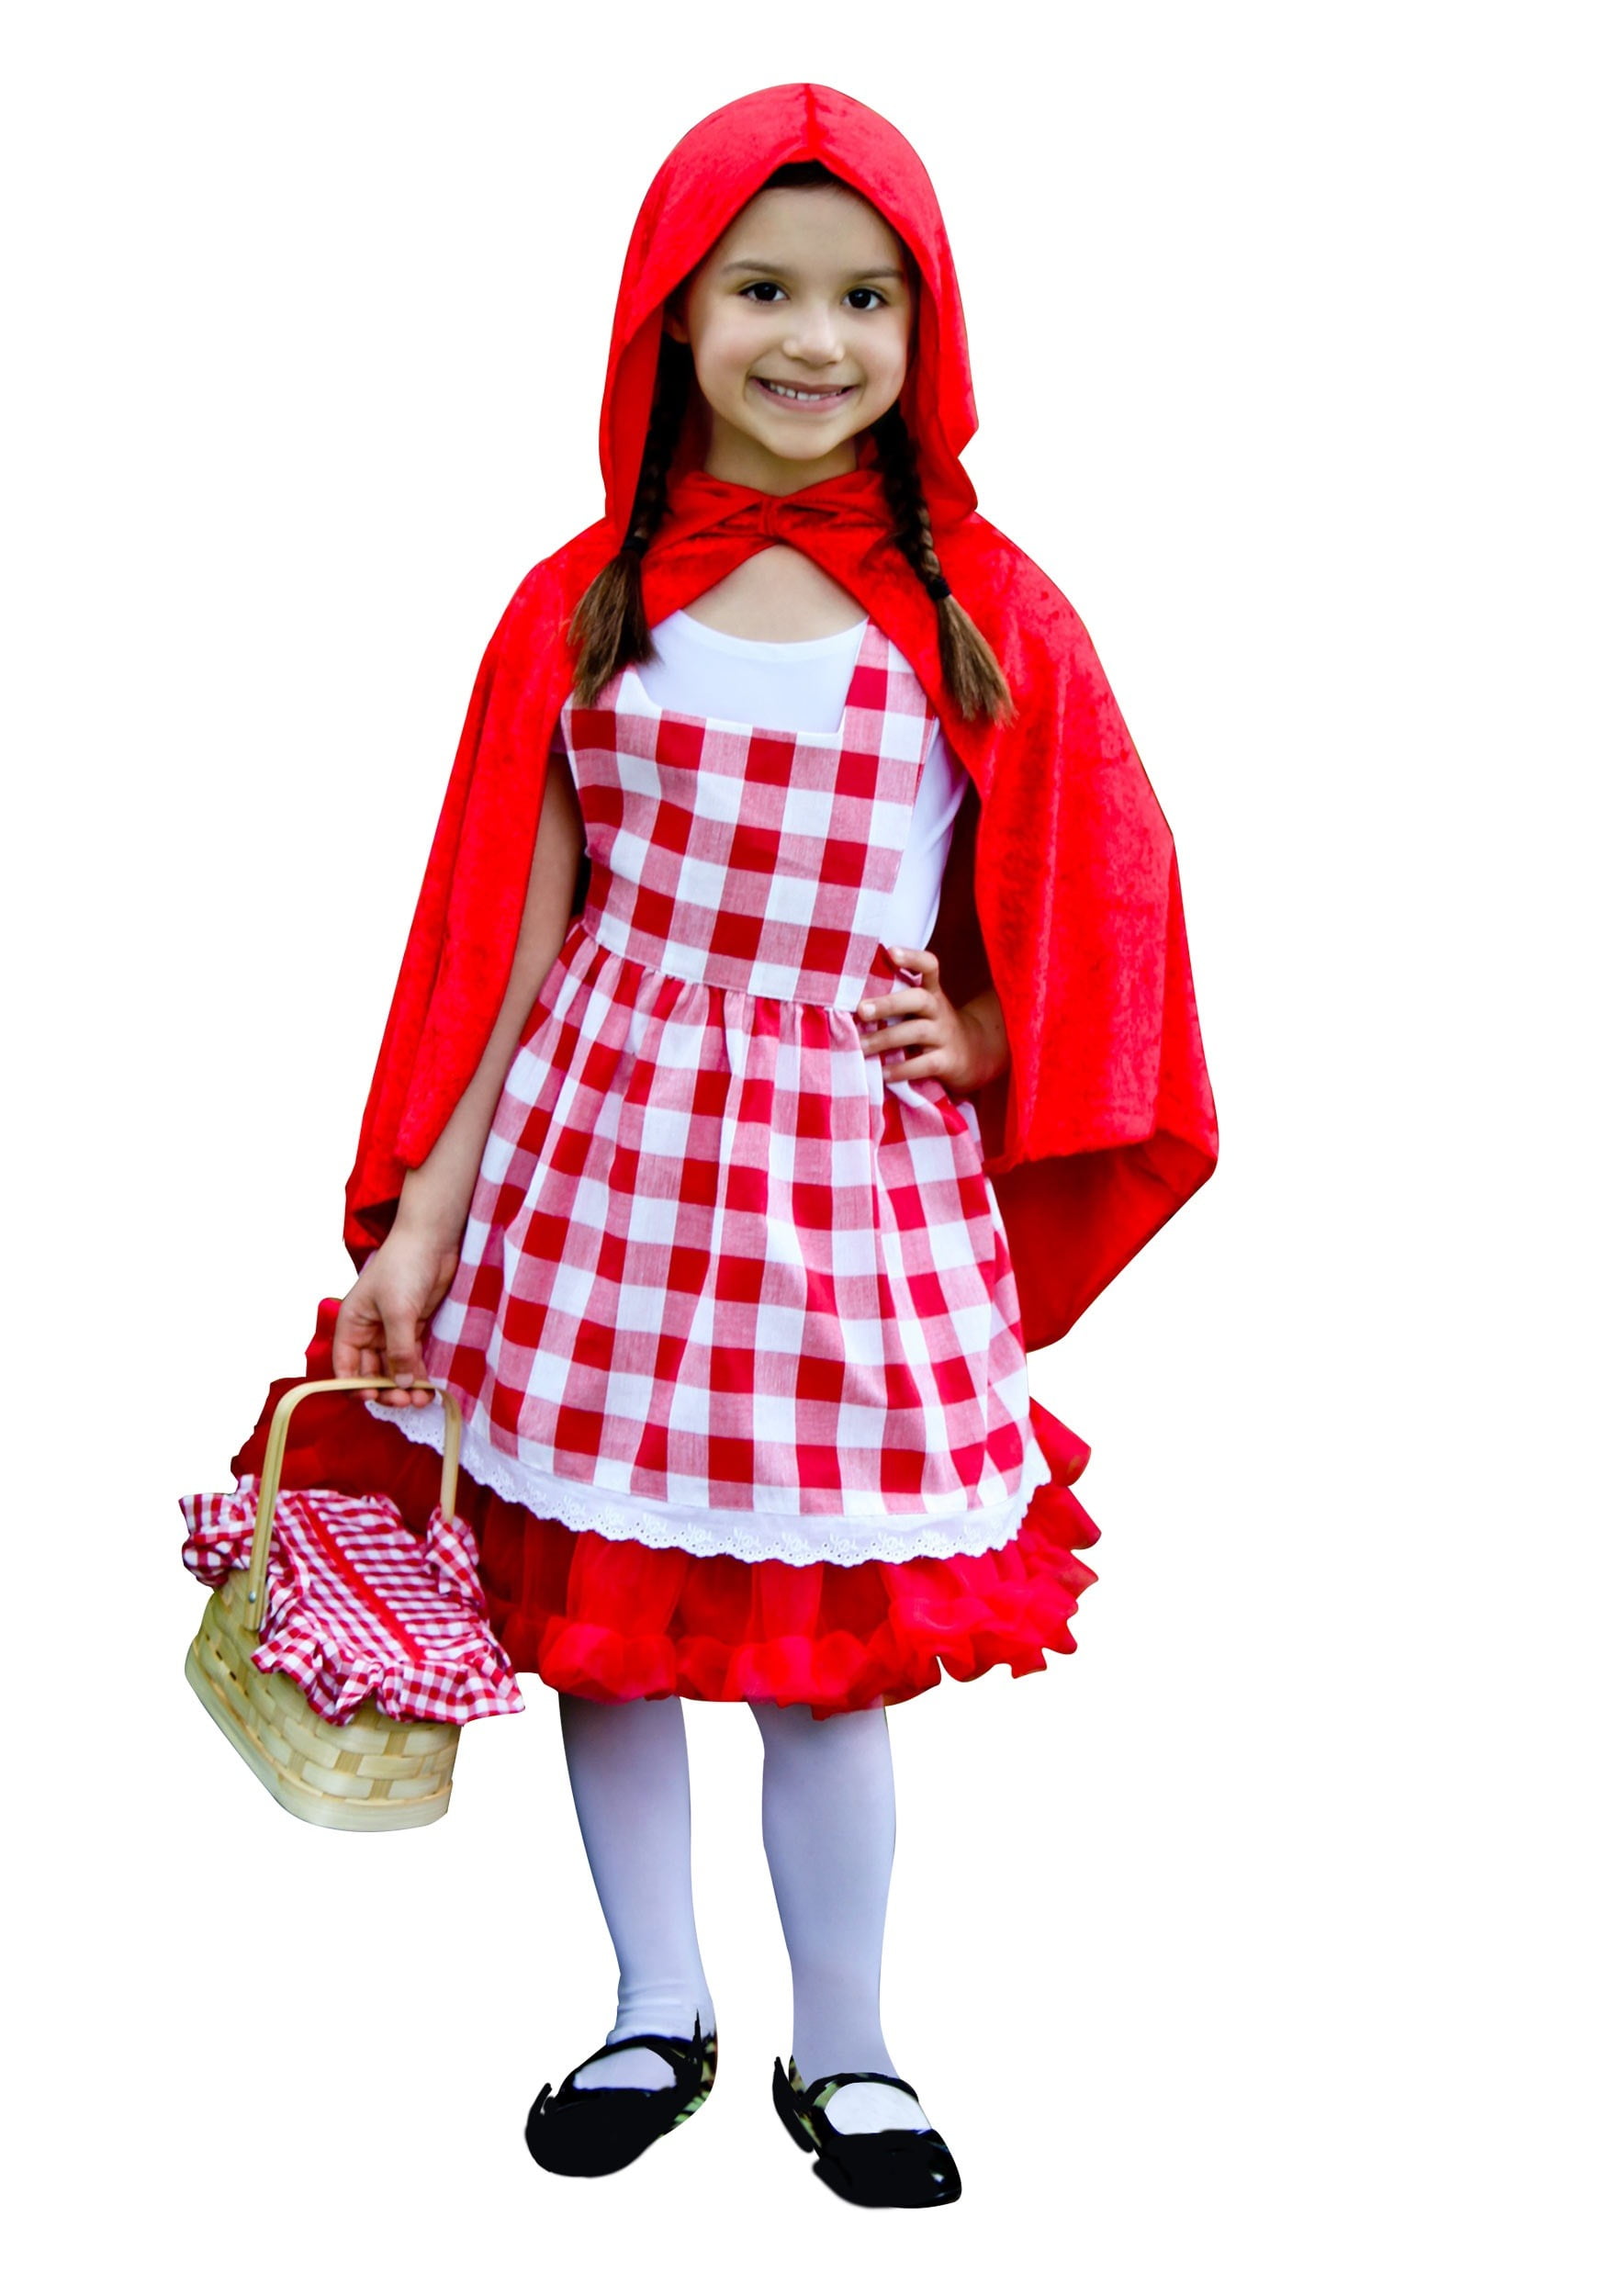 Strangeling 04022 Red Riding Hood Junior Teen Holiday Party Costume 